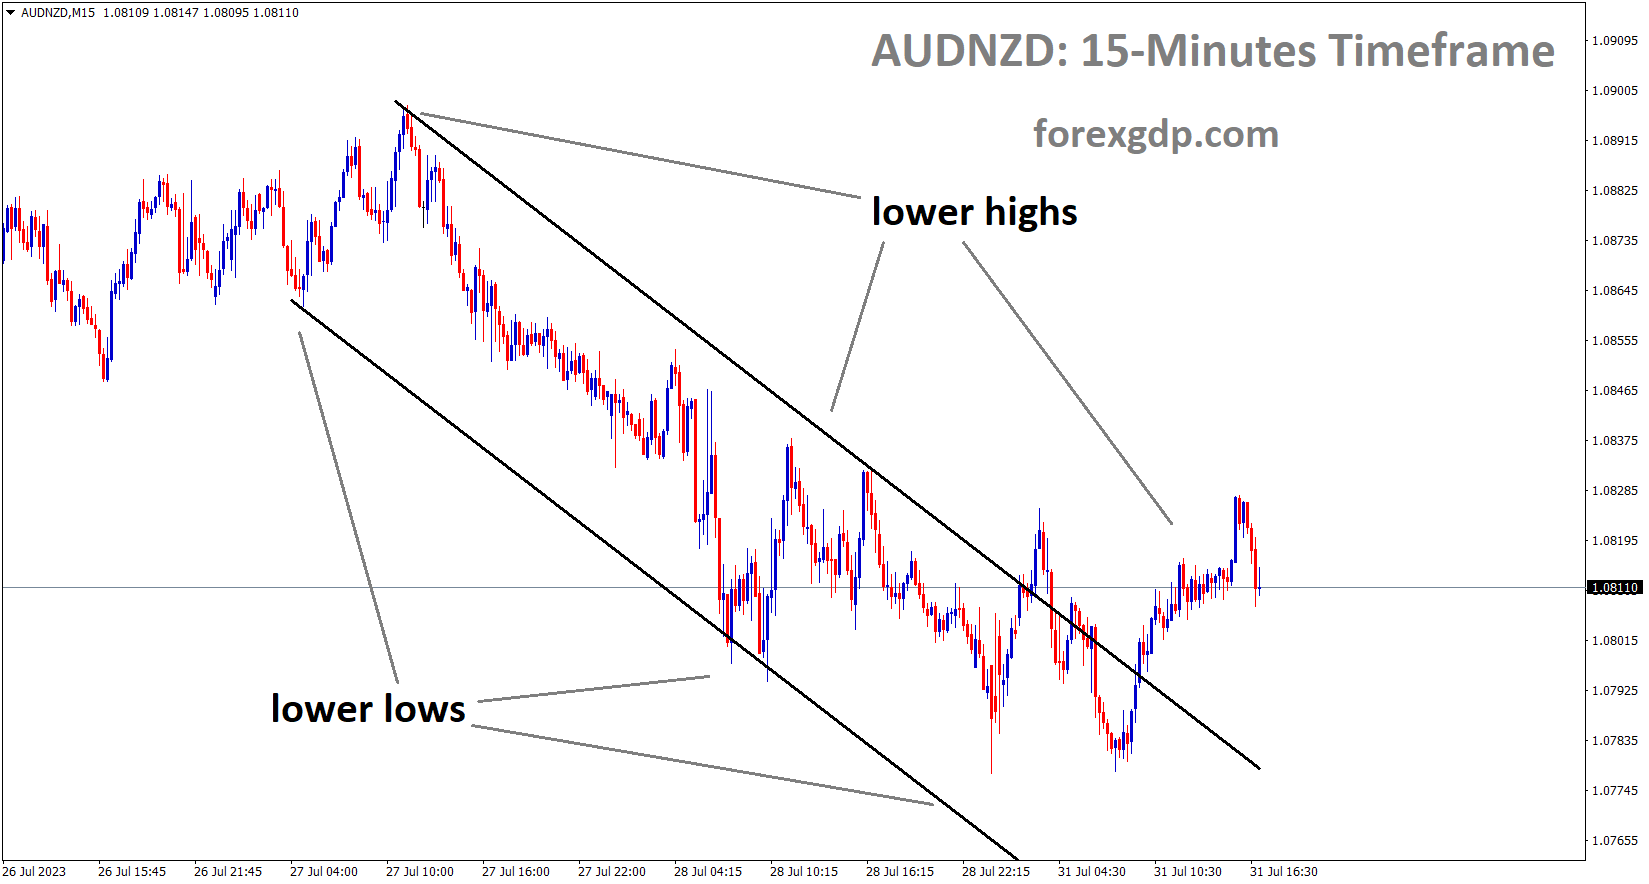 AUDNZD M15 TF analysis Market is moving in the Descending channel and the market has reached the lower high area of the channel